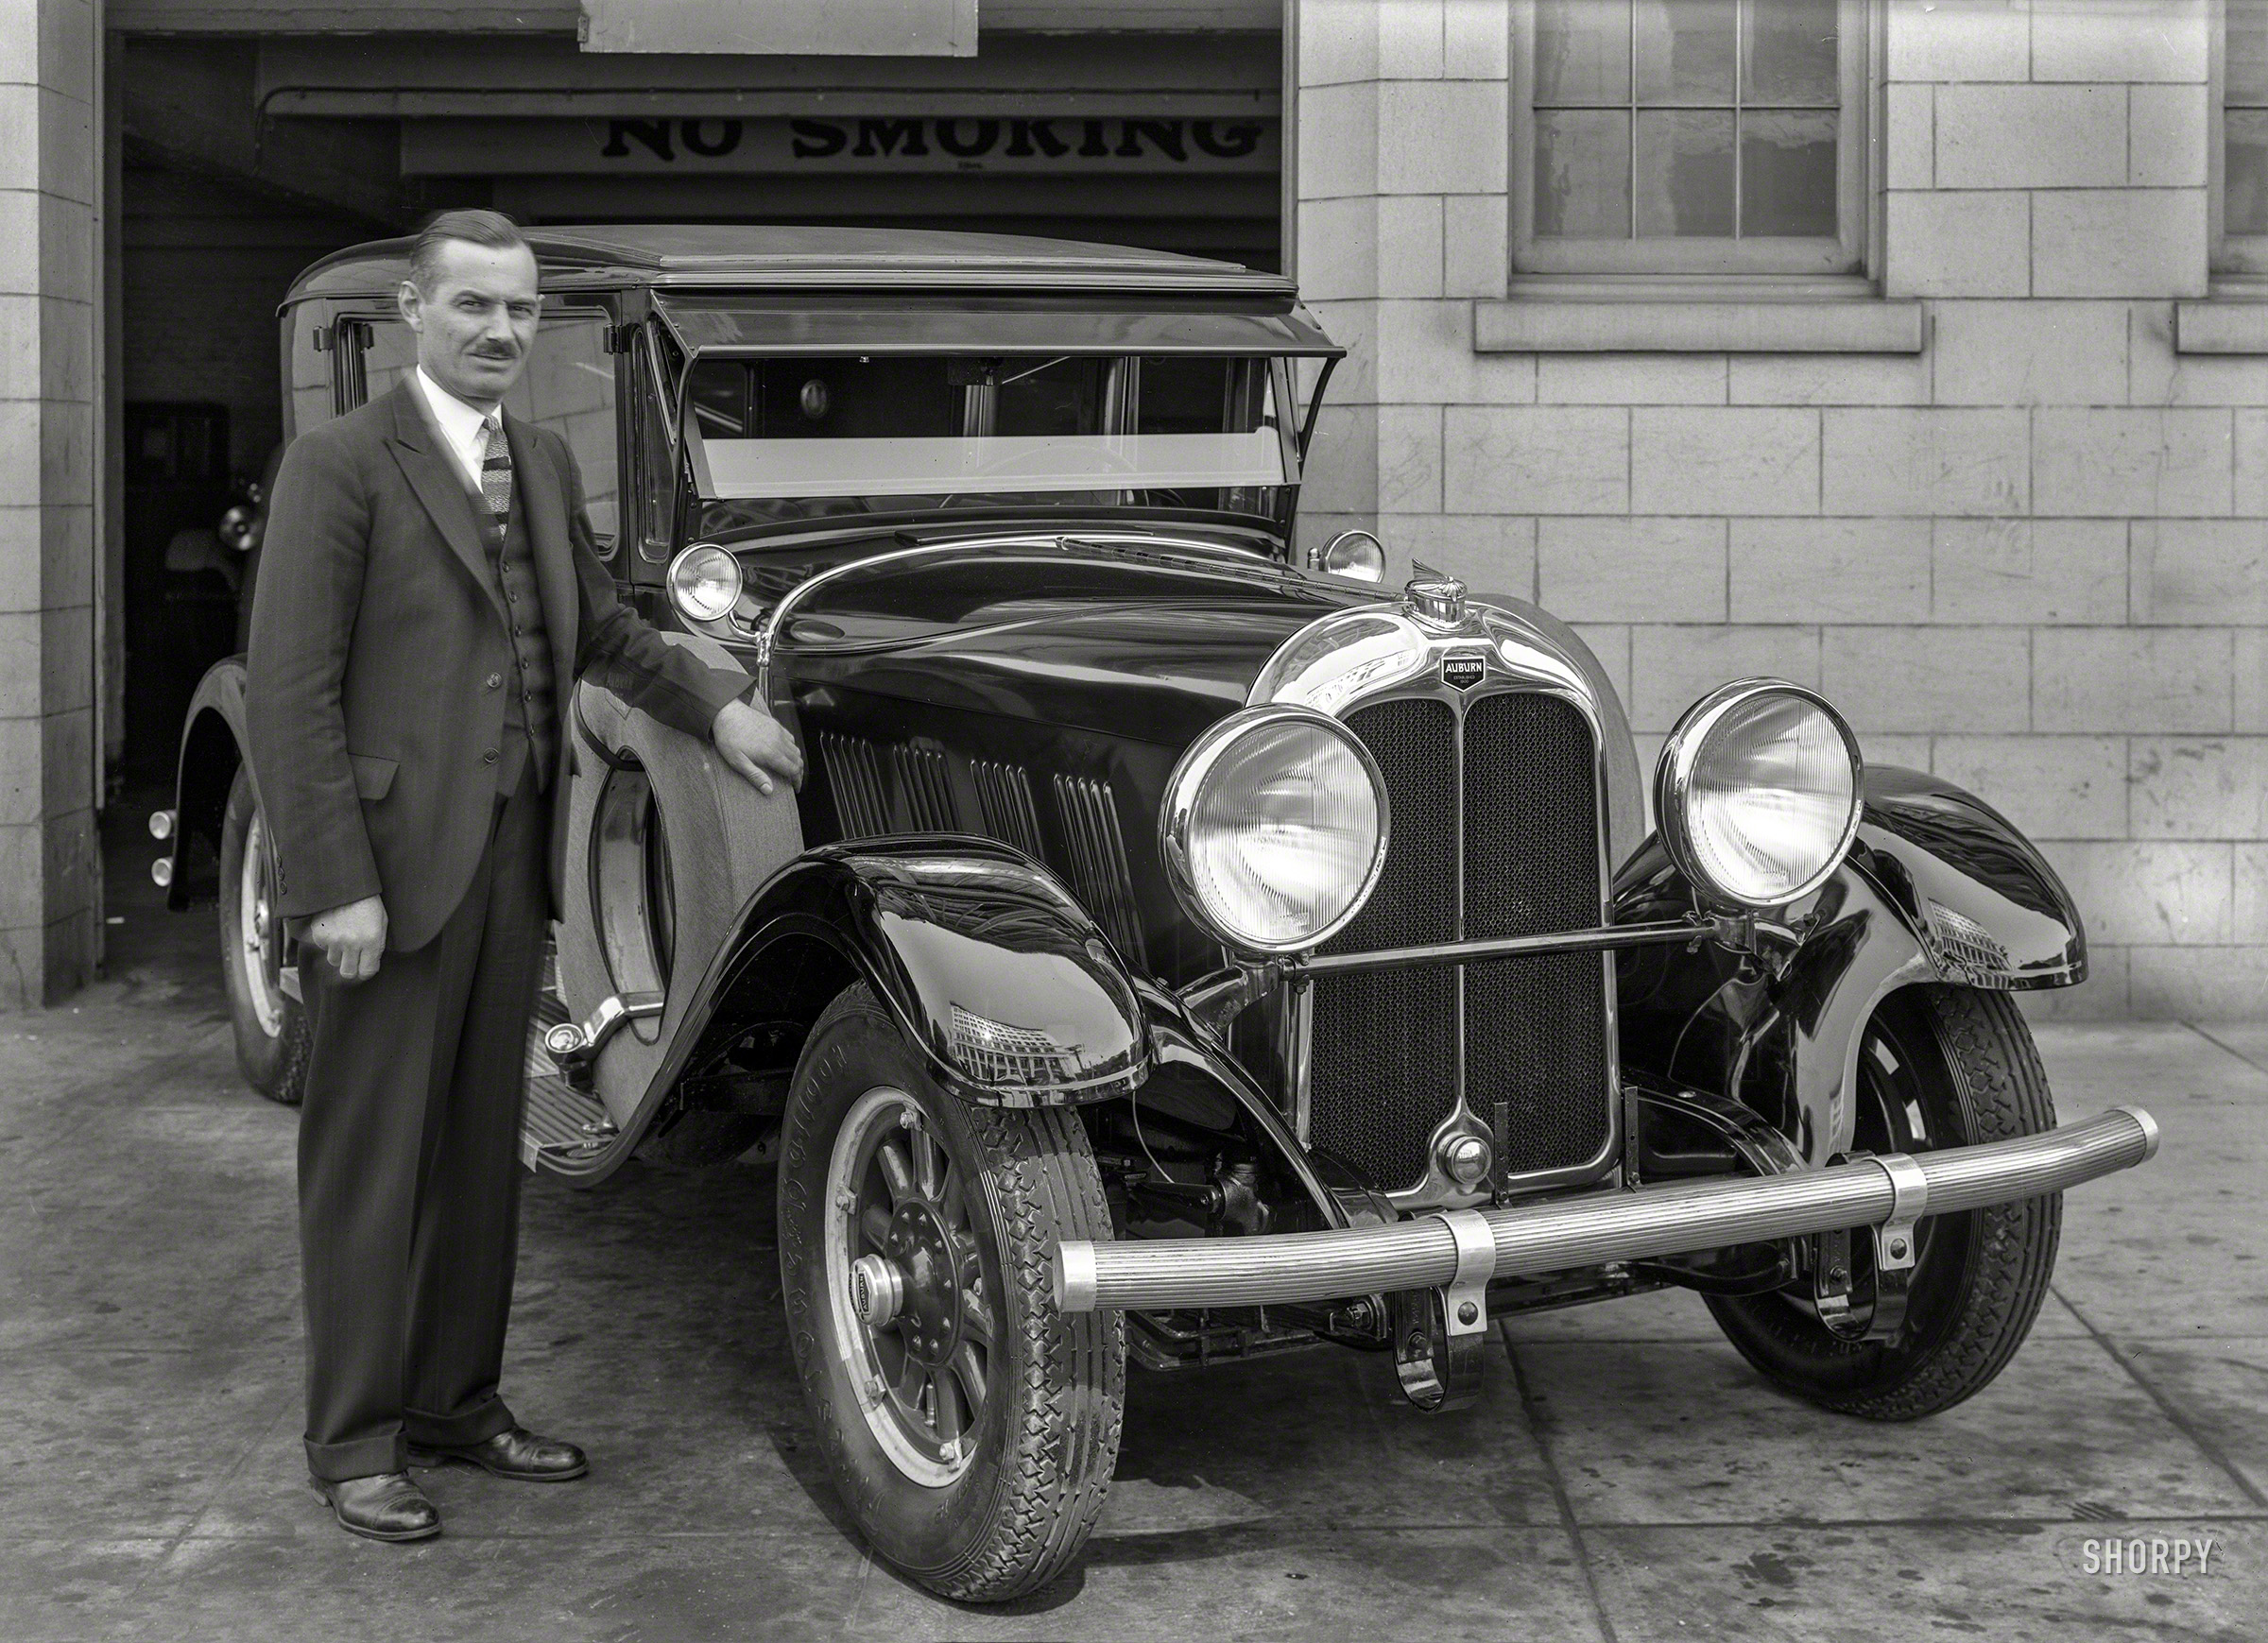 &nbsp; &nbsp; &nbsp; &nbsp; Arthur D'Ettel of the California Automobile Trade Association.
San Francisco, 1928. "Auburn 115 at garage." Right across whatever building that is reflected in the fender. 5x7 glass negative by Christopher Helin. View full size.